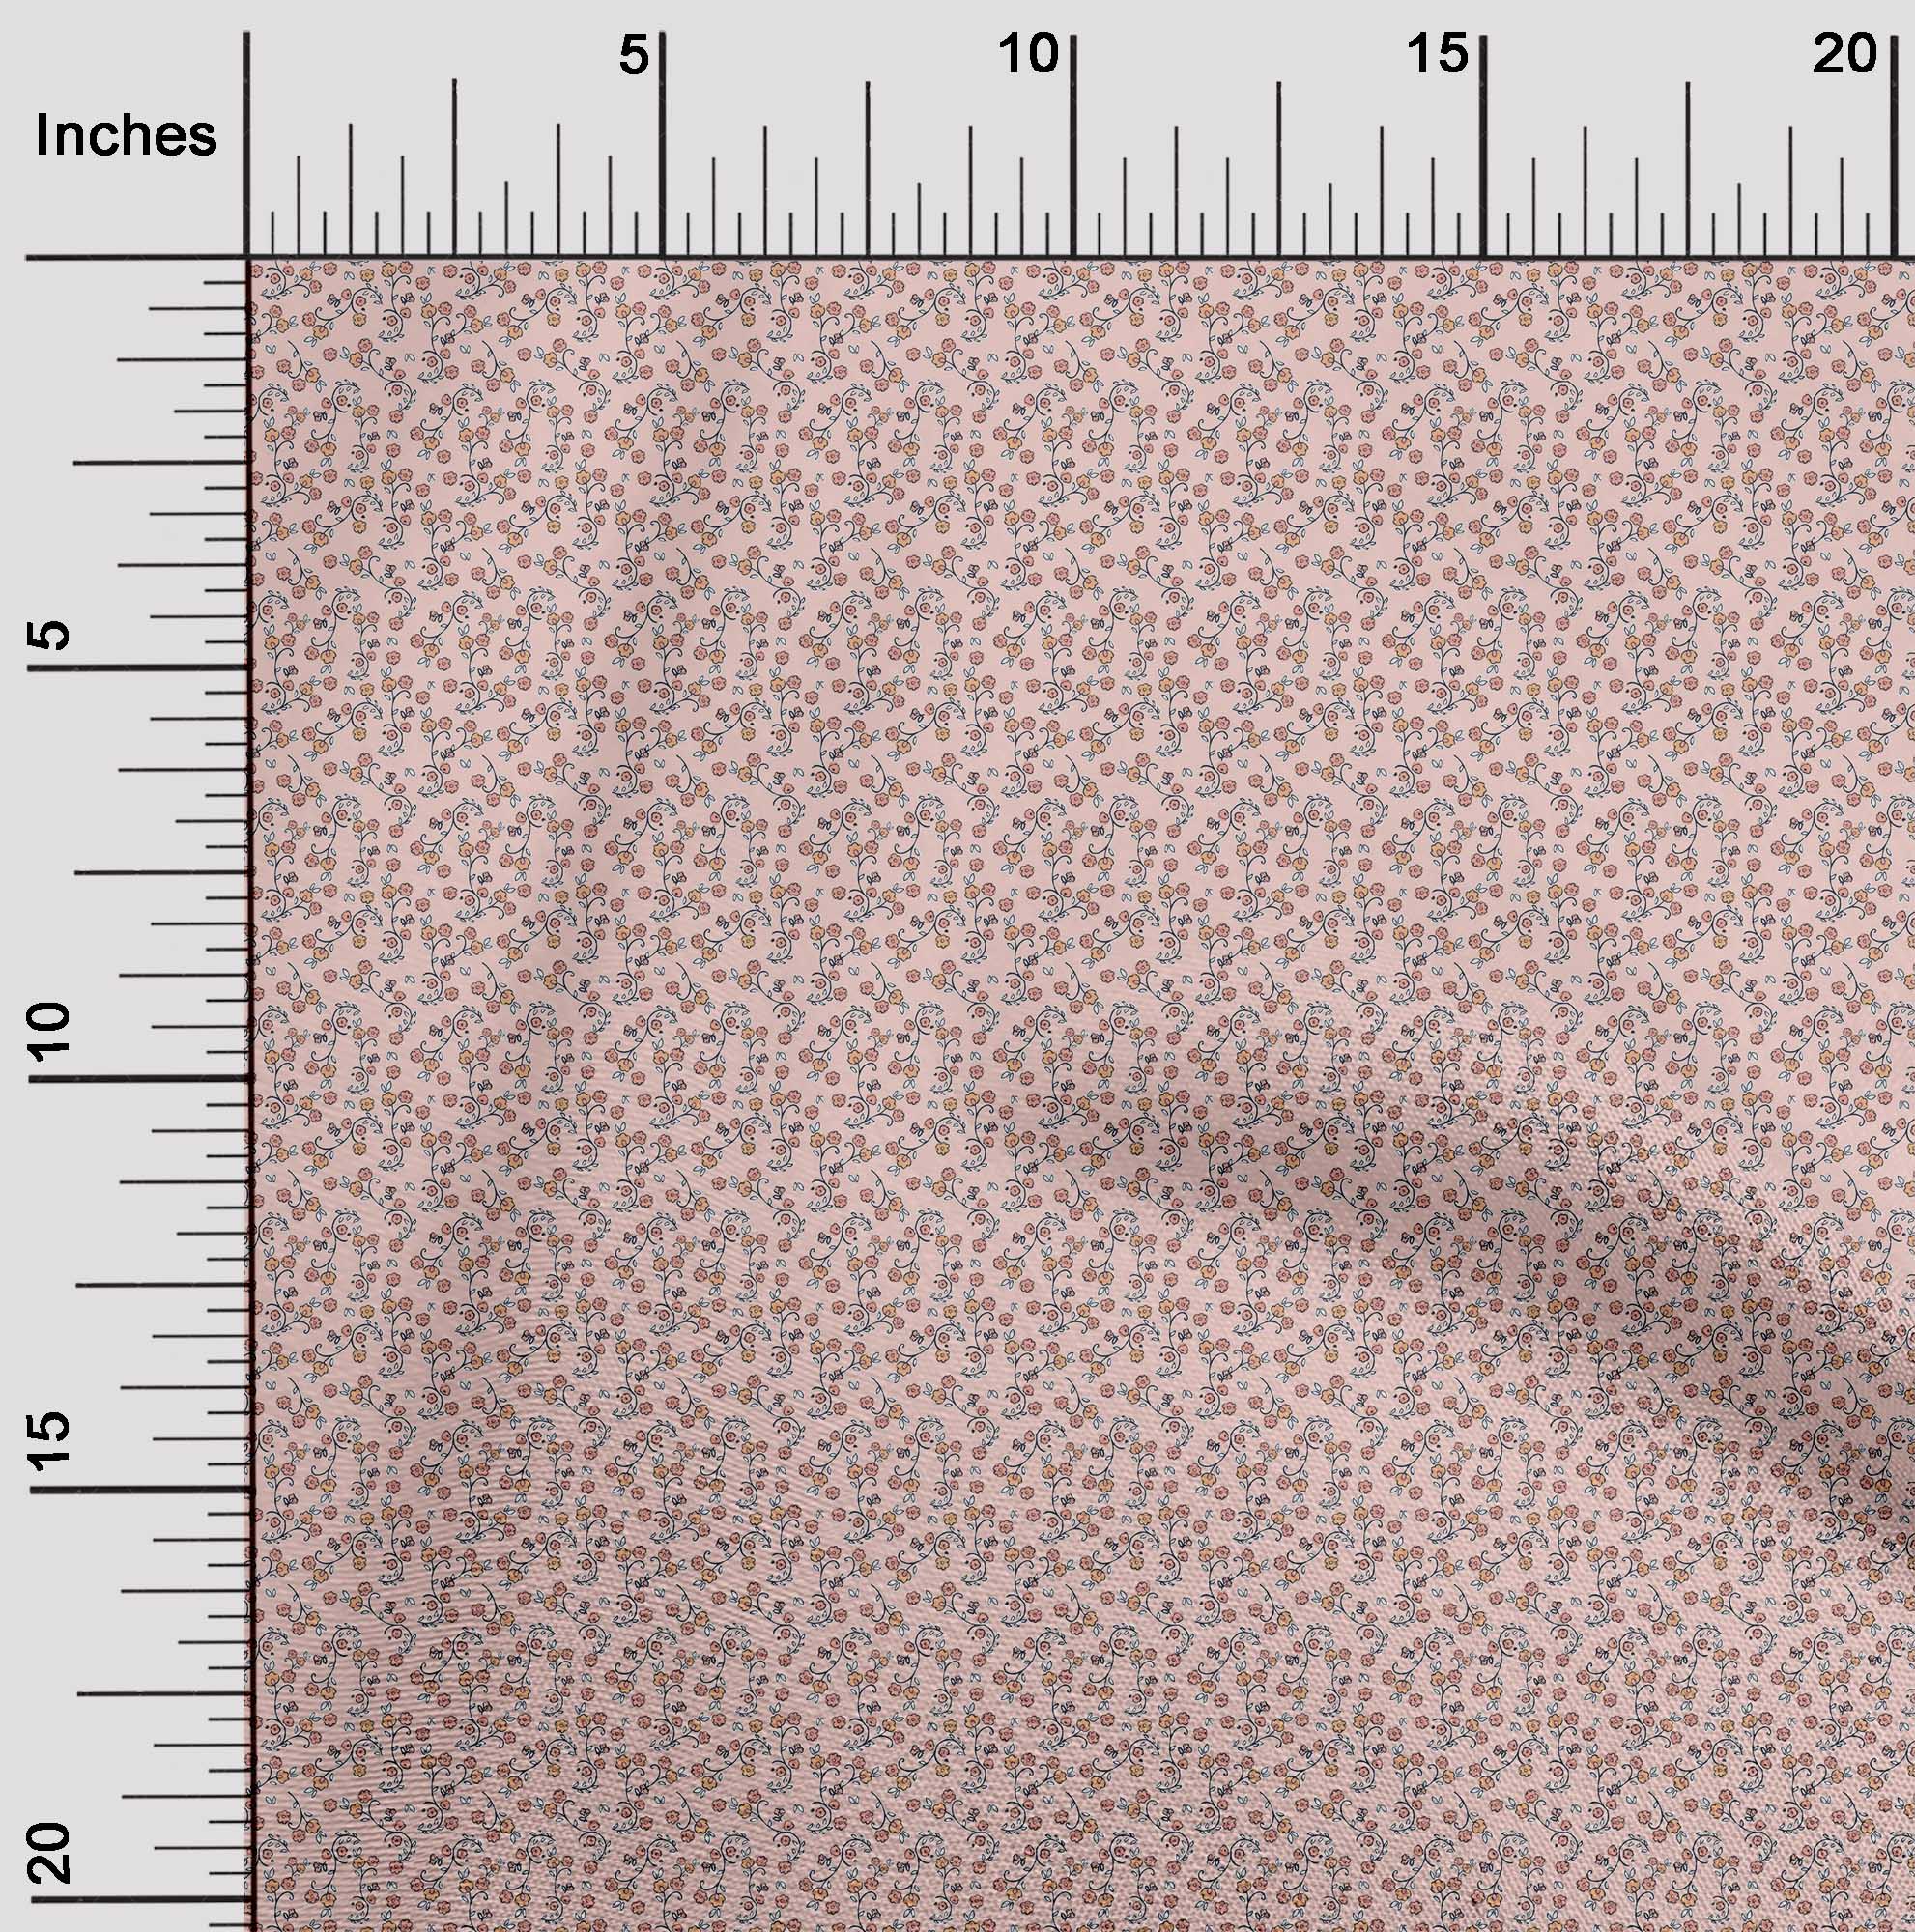 oneOone Silk Tabby Light Pink Fabric Floral Ditsy Quilting